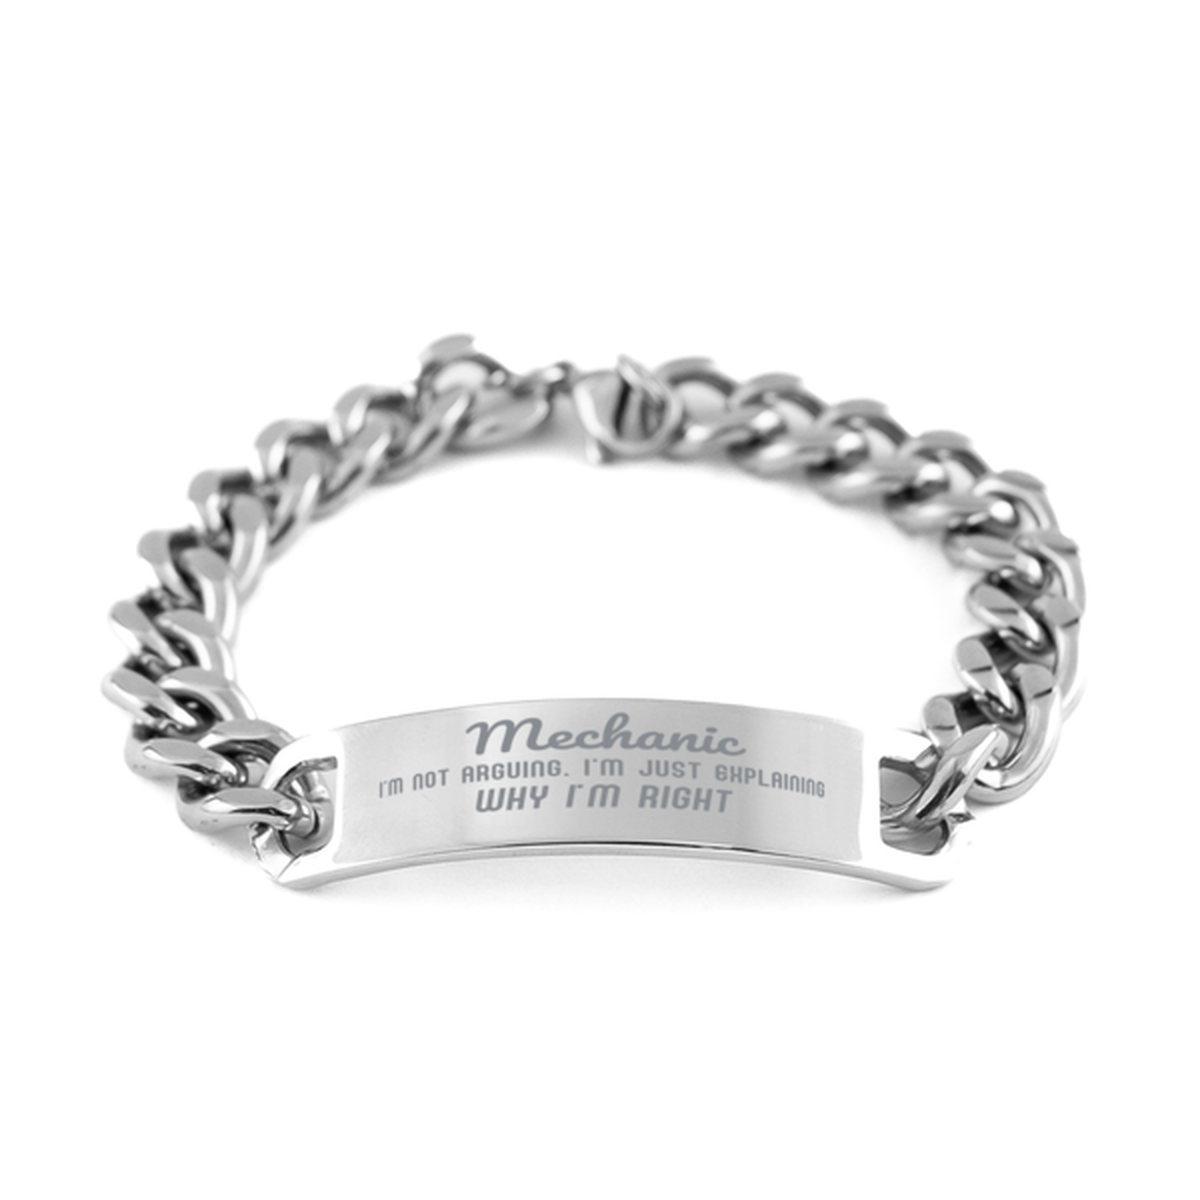 Mechanic I'm not Arguing. I'm Just Explaining Why I'm RIGHT Cuban Chain Stainless Steel Bracelet, Graduation Birthday Christmas Mechanic Gifts For Mechanic Funny Saying Quote Present for Men Women Coworker